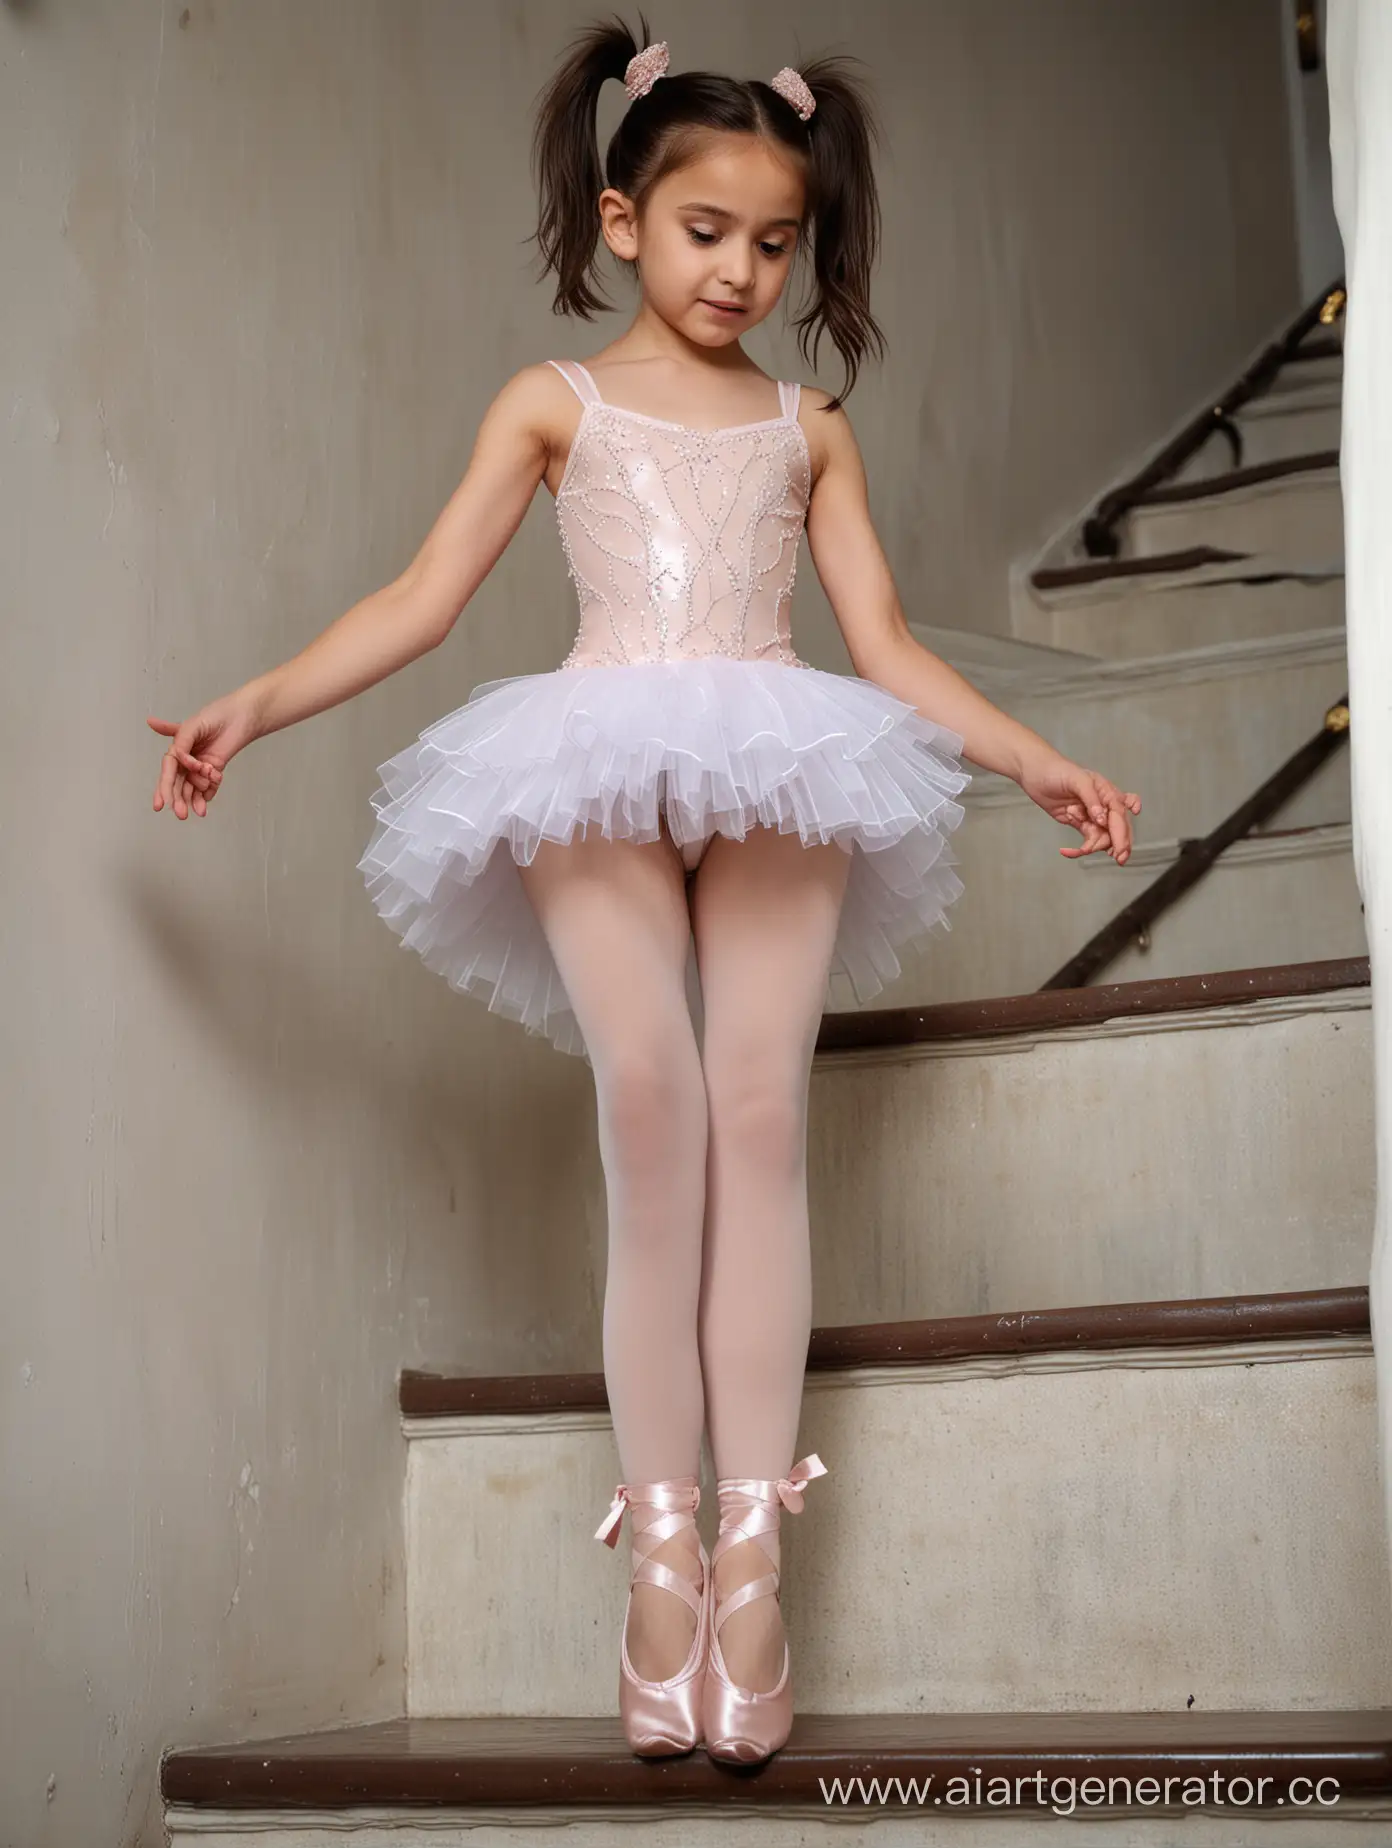 A little skinny ugly girl, 10 years old, ballet dress, naked feets, standing on the stairs, from below, close up, dark hair, ponytail hair, under view, arabian, bottom view, earrings, painful face